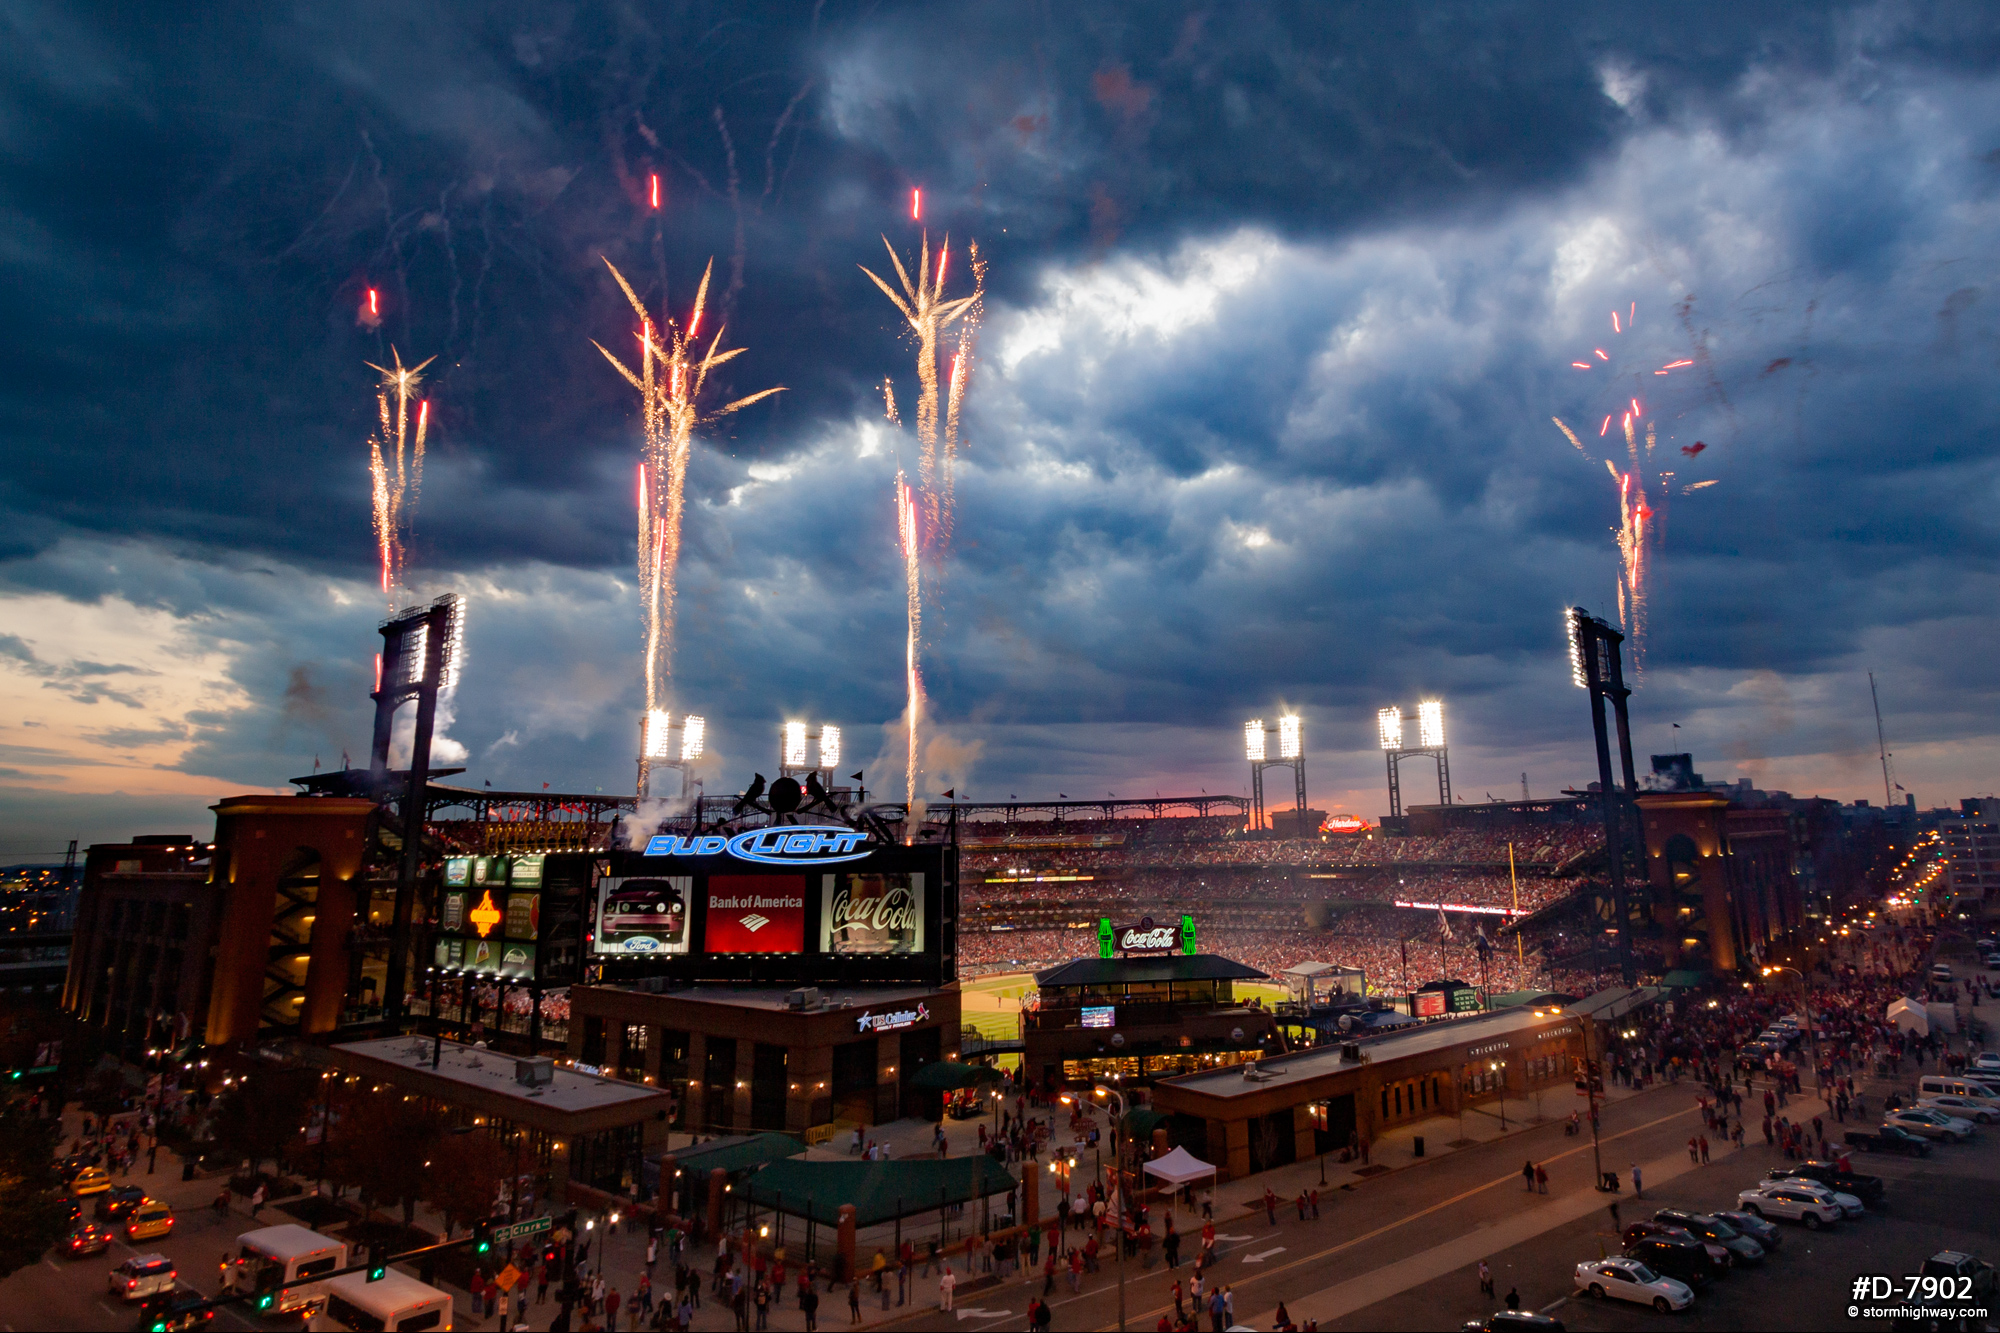 Fireworks at Busch Stadium during the 2011 World Series victory celebration